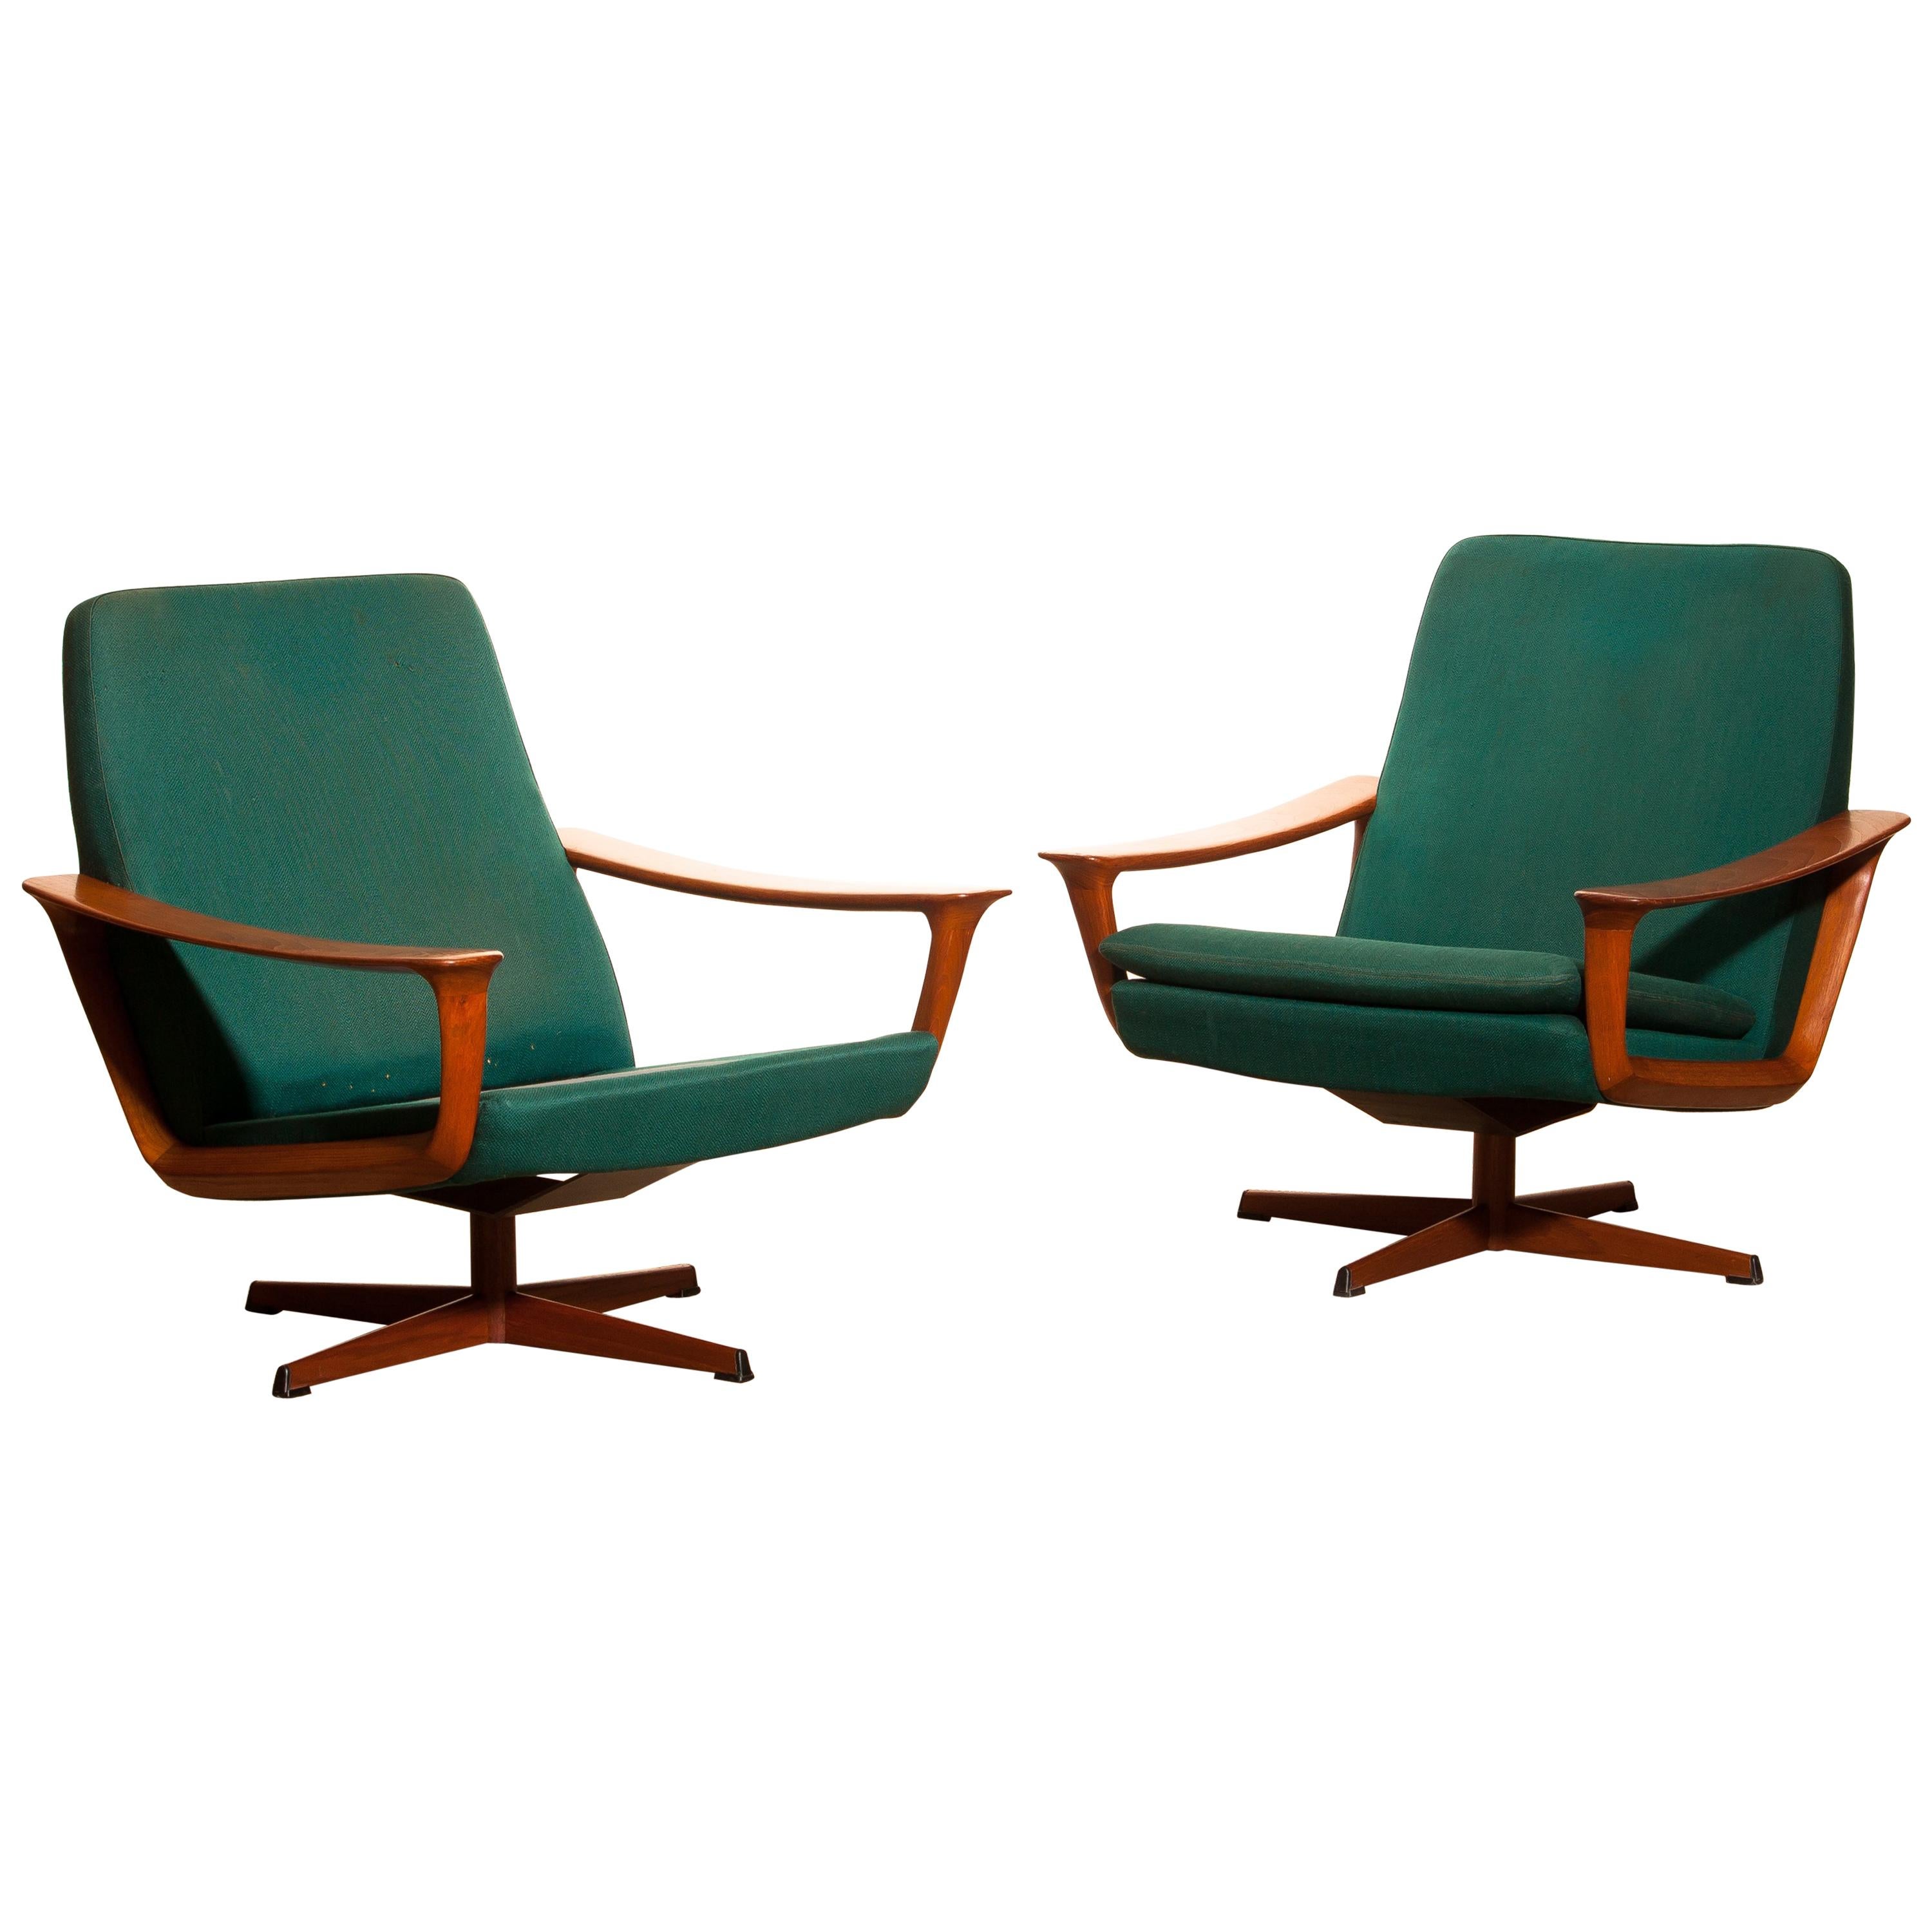 1960s, Teak Set of Two Swivel Chairs by Johannes Andersson for Trensum Denmark